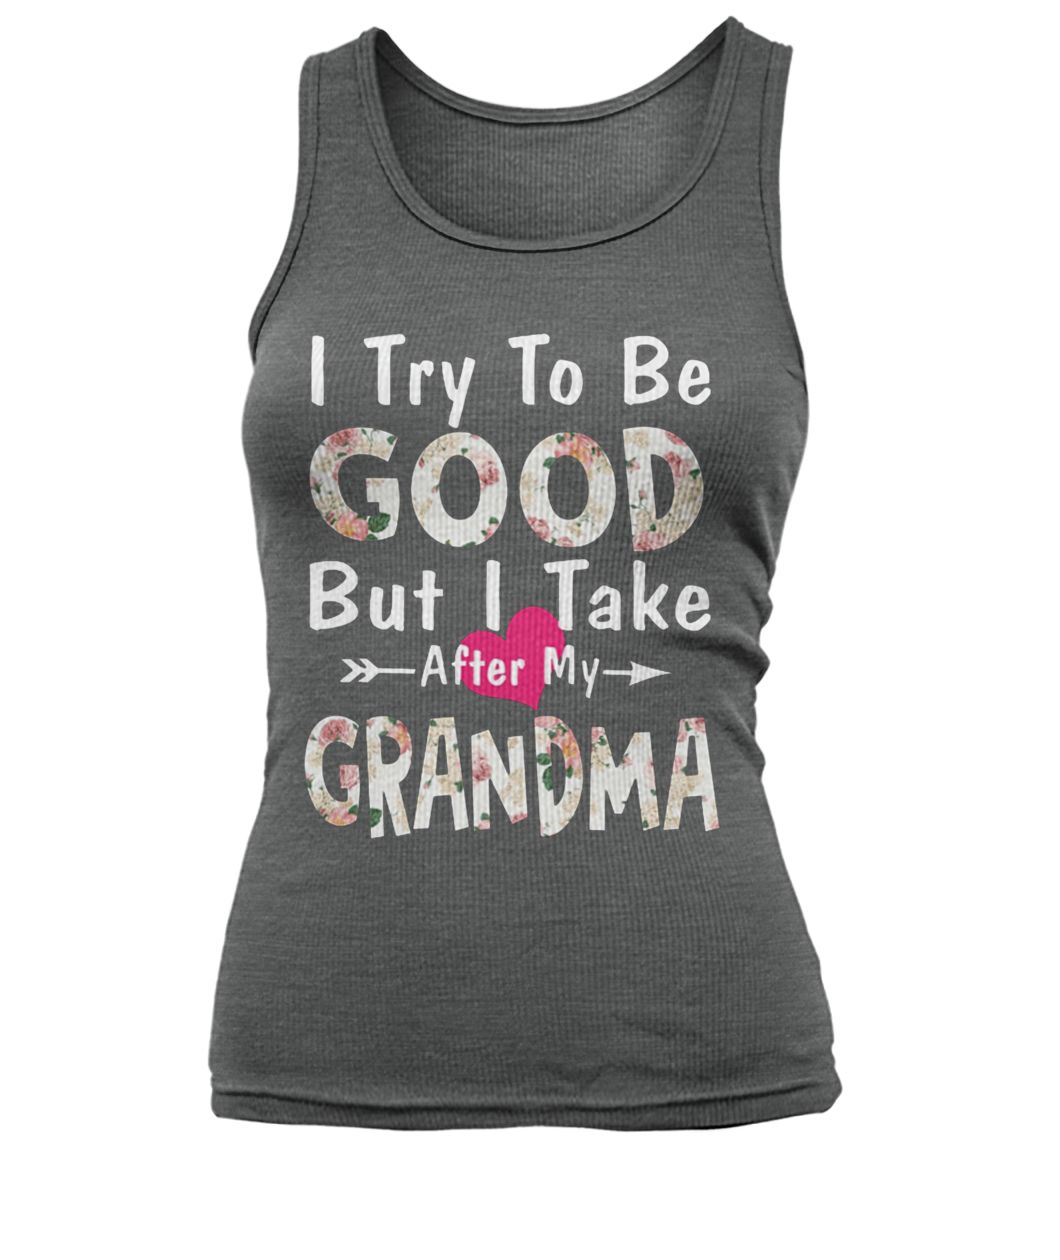 Floral I try to be good but I take after my grandma women's tank top